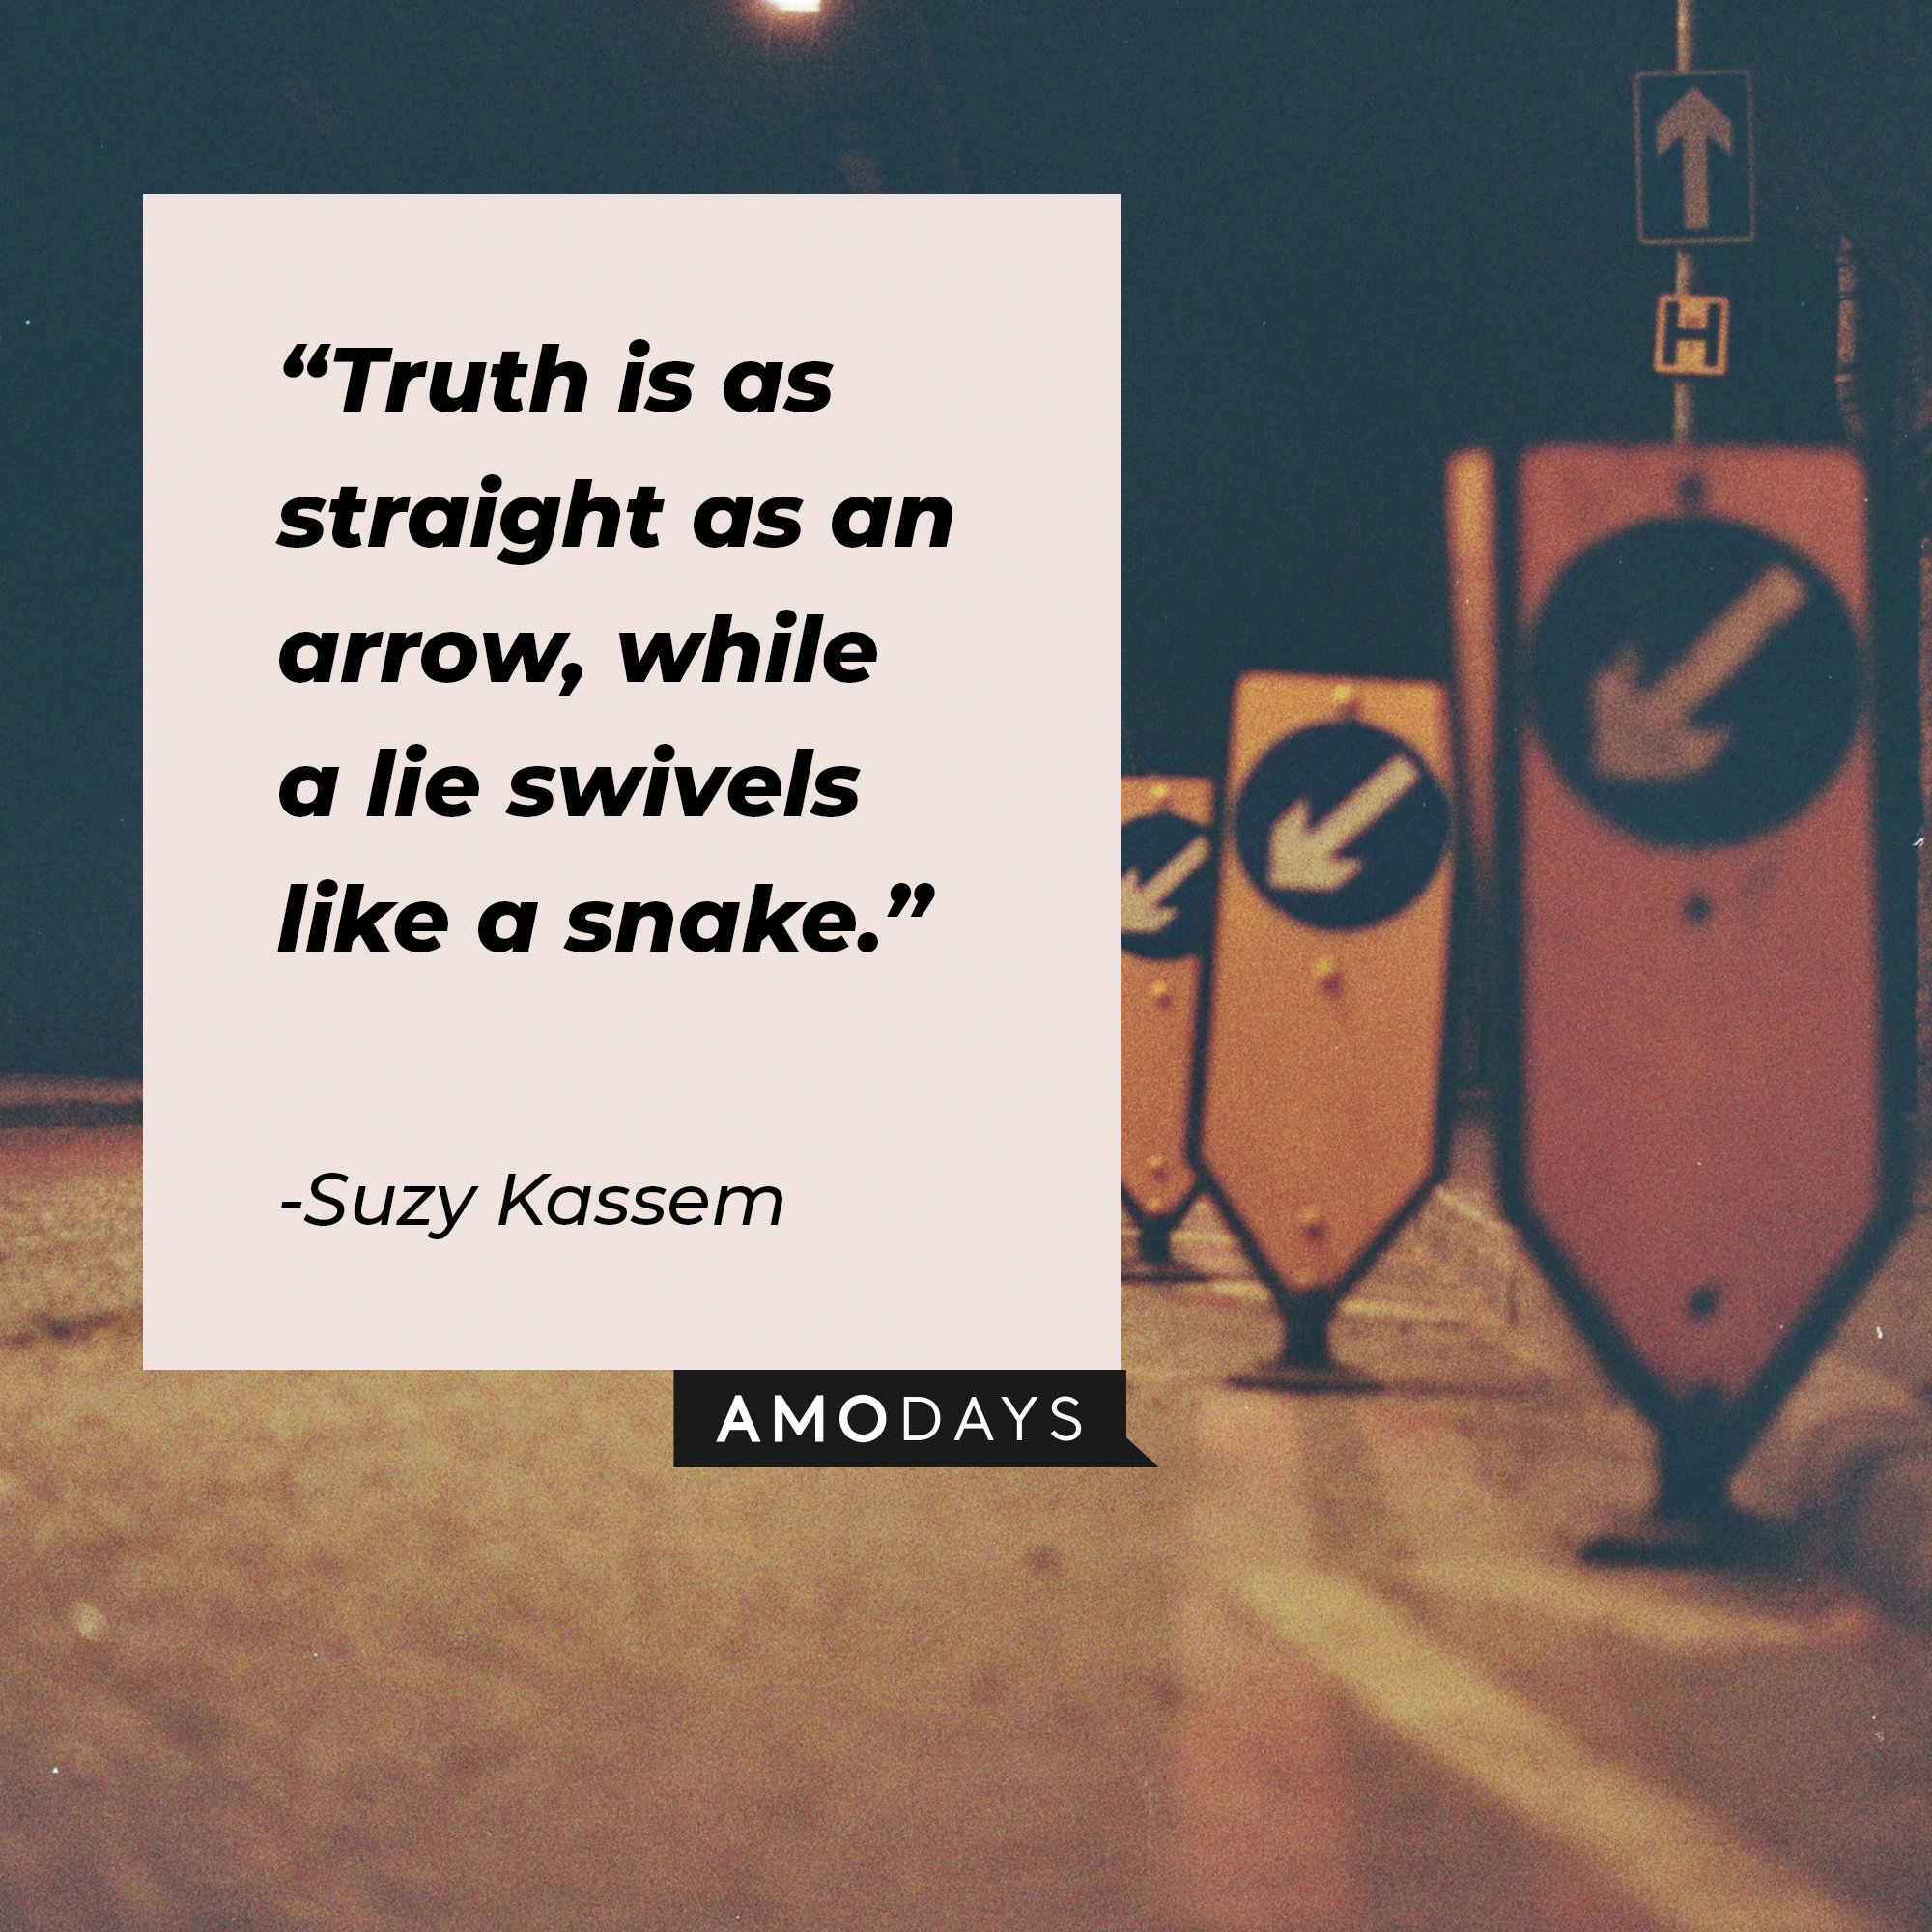 Suzy Kassem’s quote: "Truth is as straight as an arrow, while a lie swivels like a snake." | Image: AmoDays